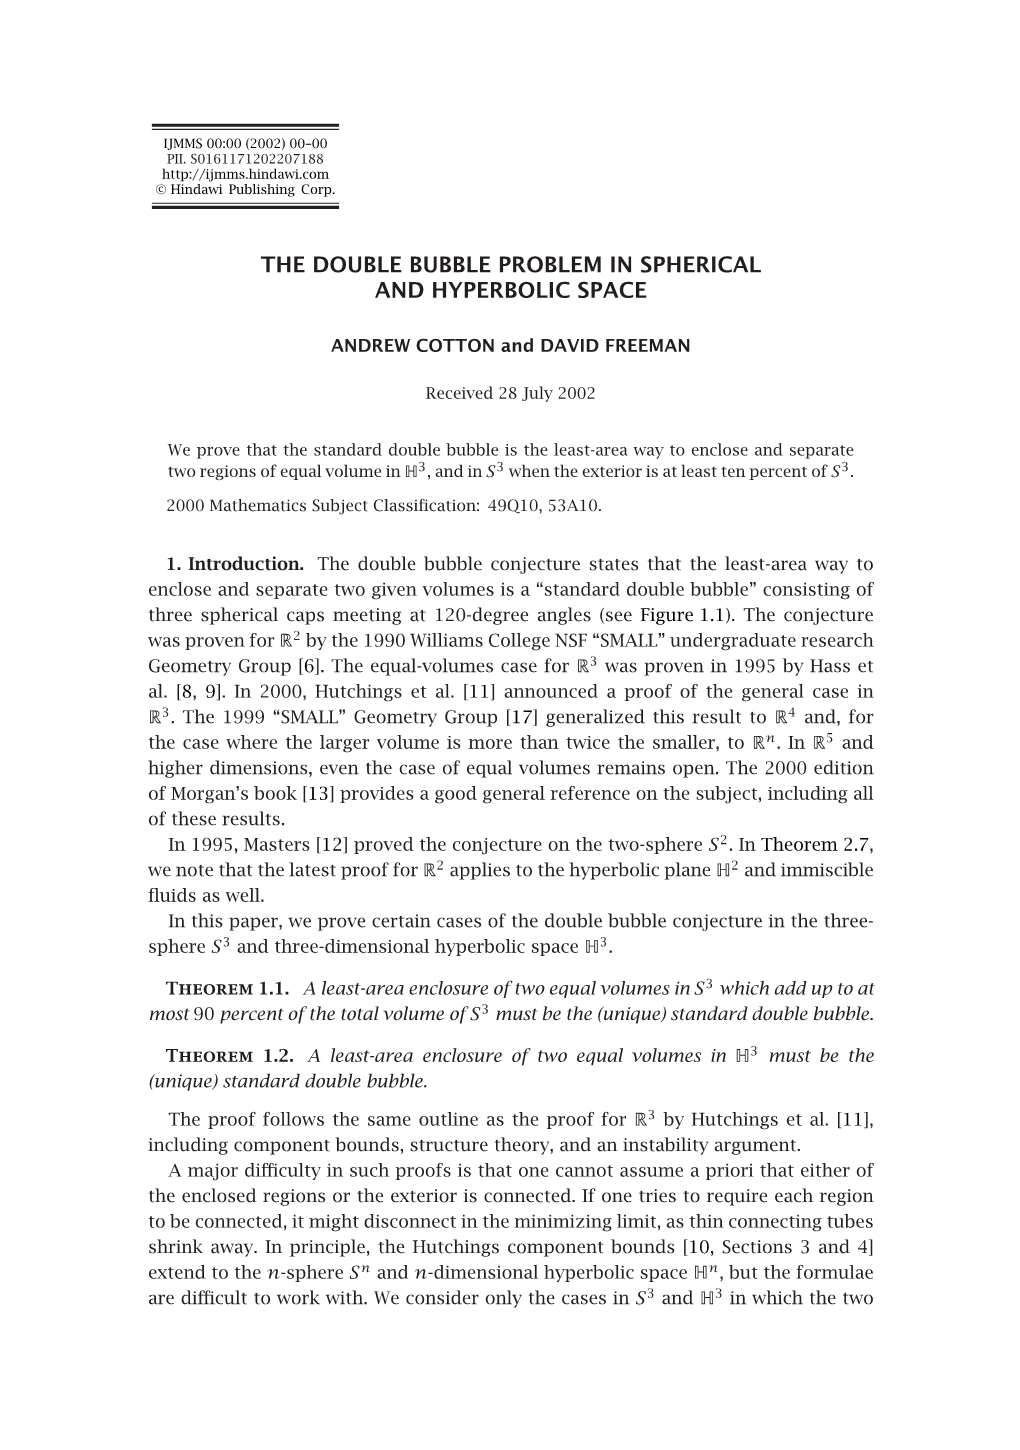 The Double Bubble Problem in Spherical and Hyperbolic Space